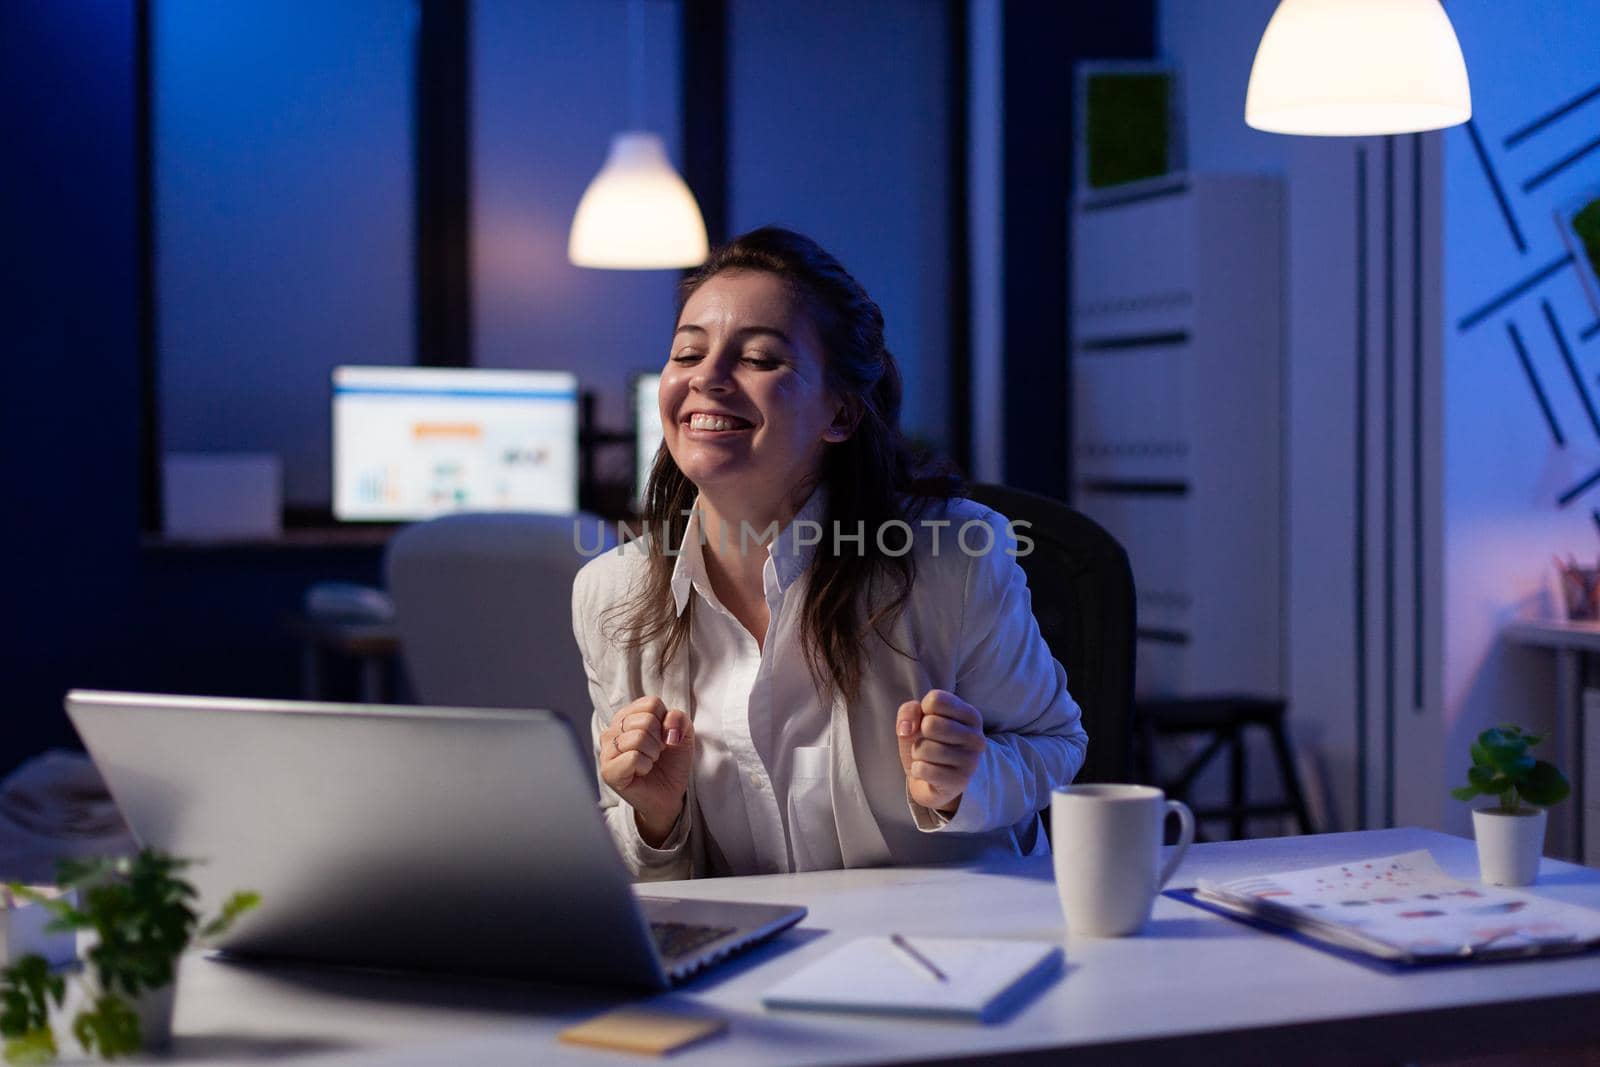 Happy businesswoman reading great online news on laptop working on economic opportunity at start up company office. Employee using modern technology network wireless studying financial statistics